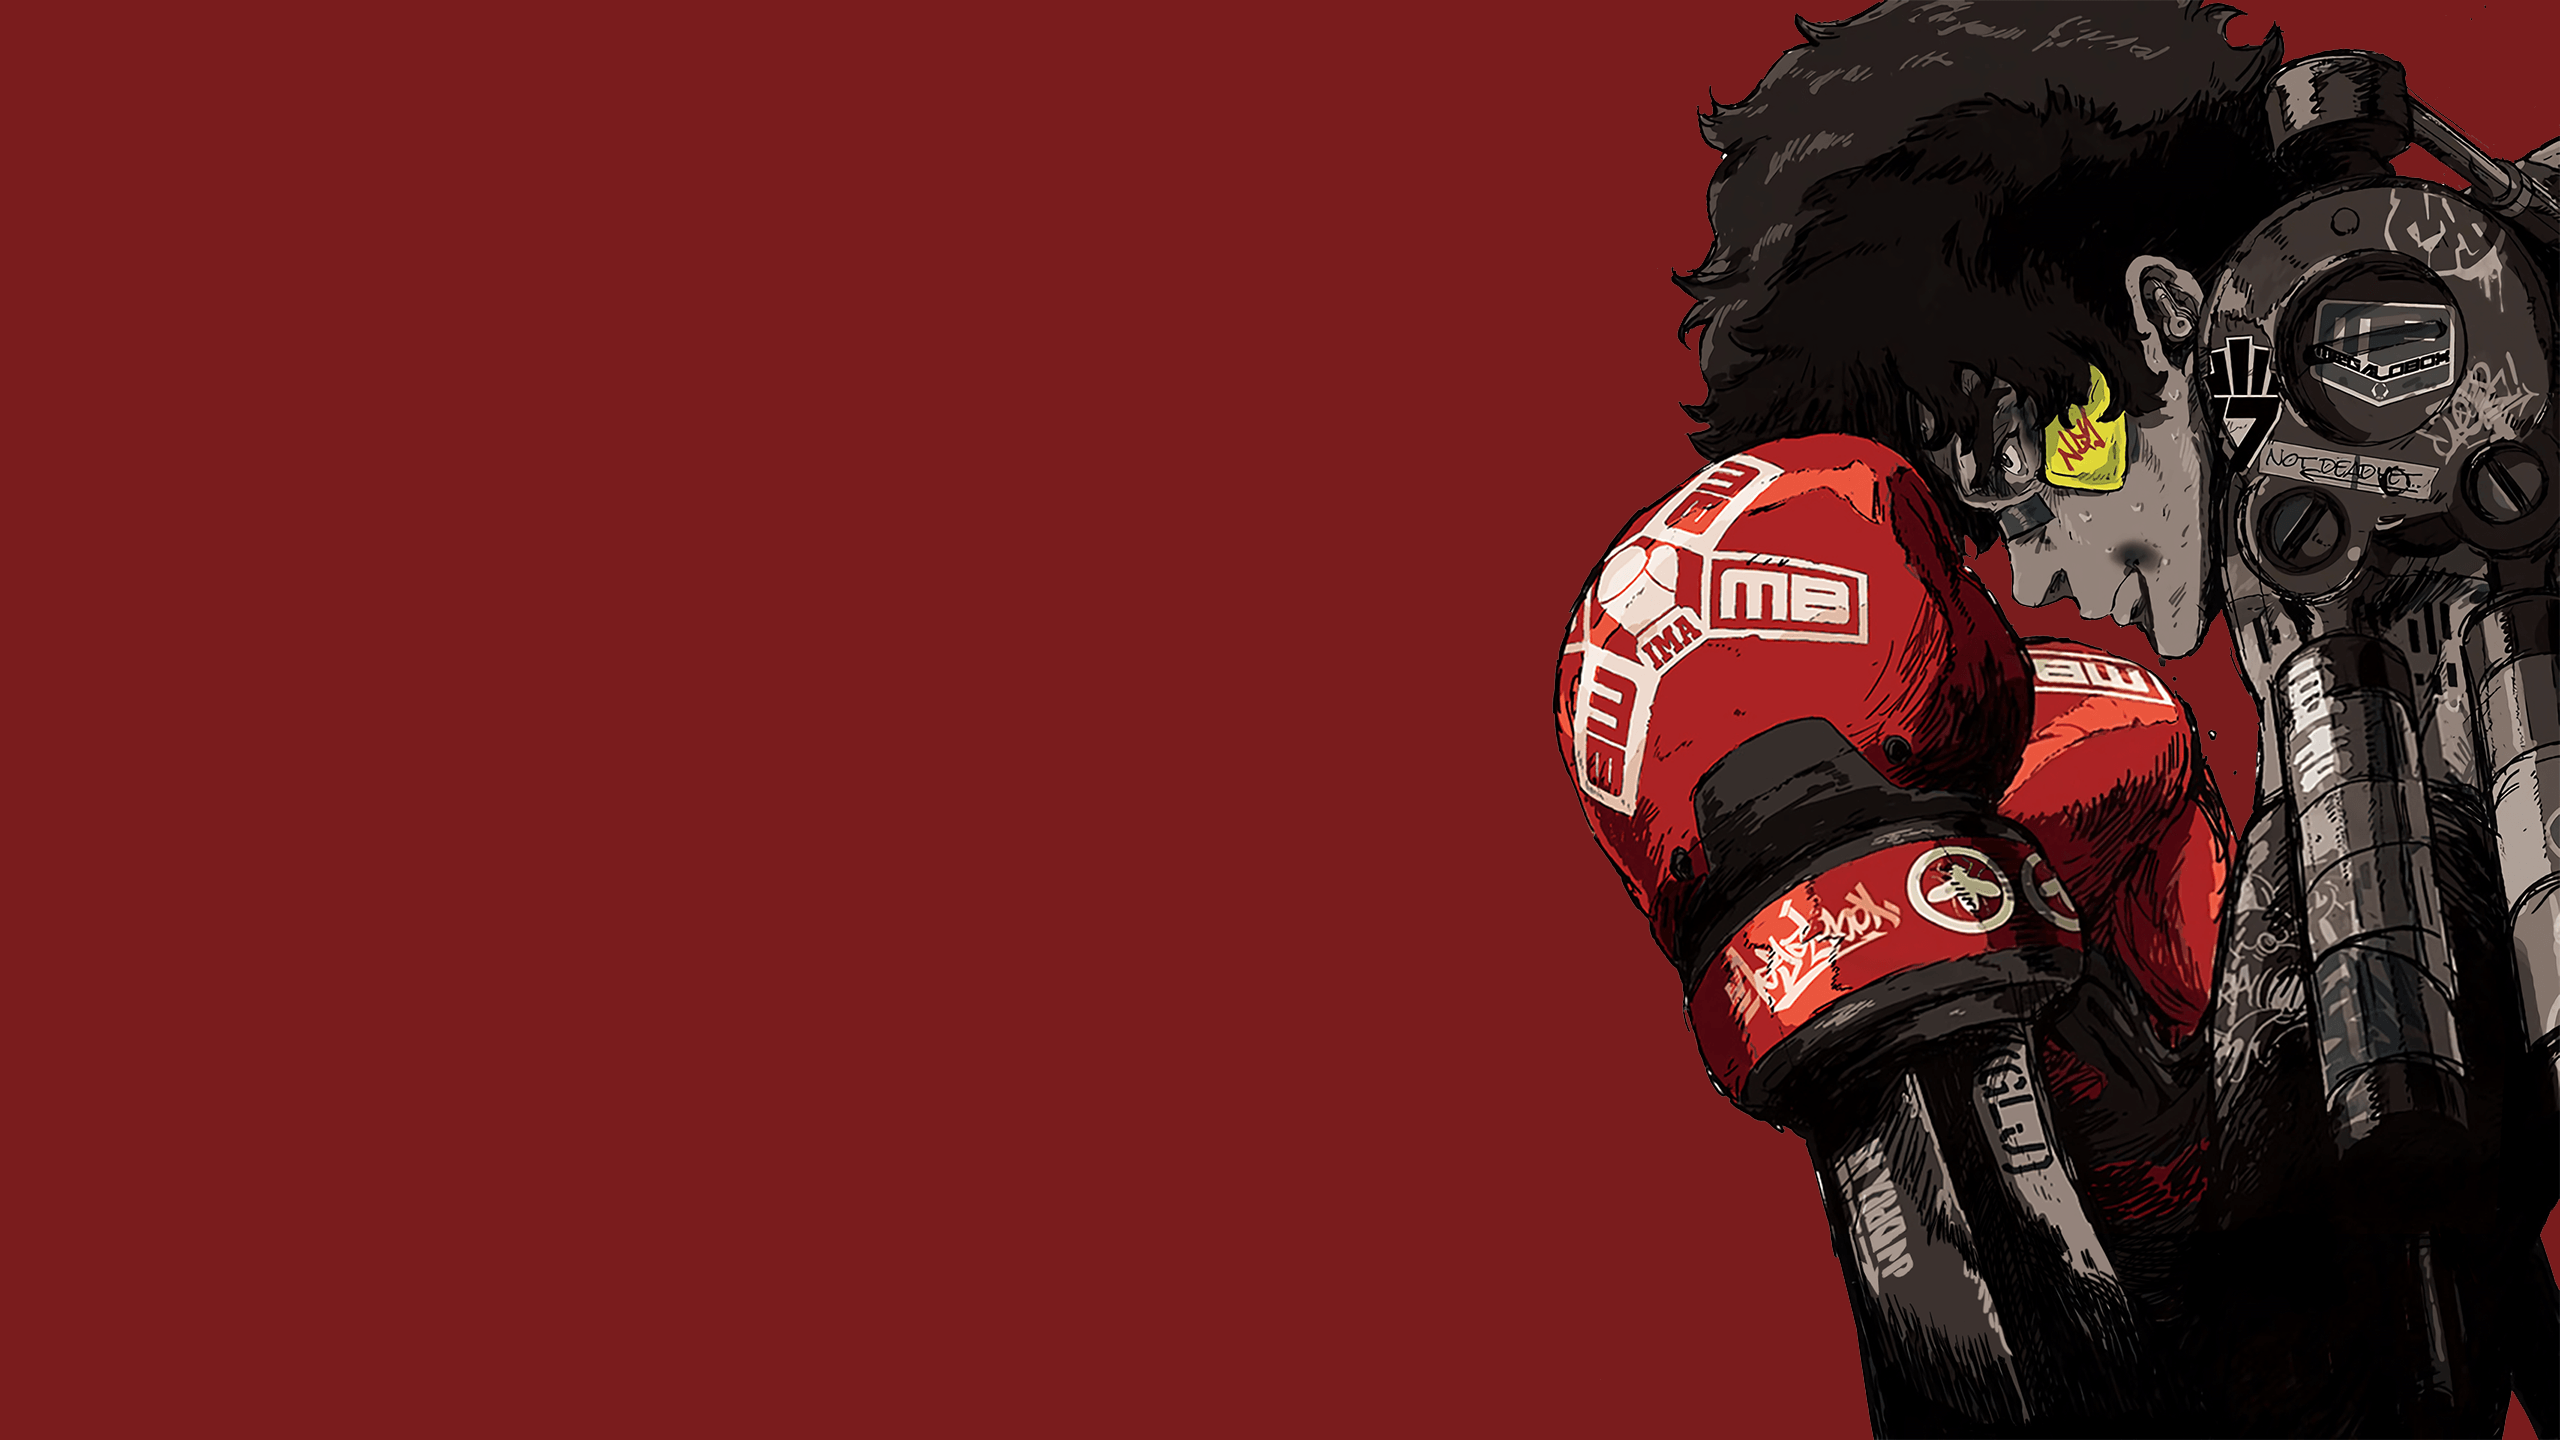 Megalo Box Hd Wallpapers Top Free Megalo Box Hd Backgrounds Wallpaperaccess